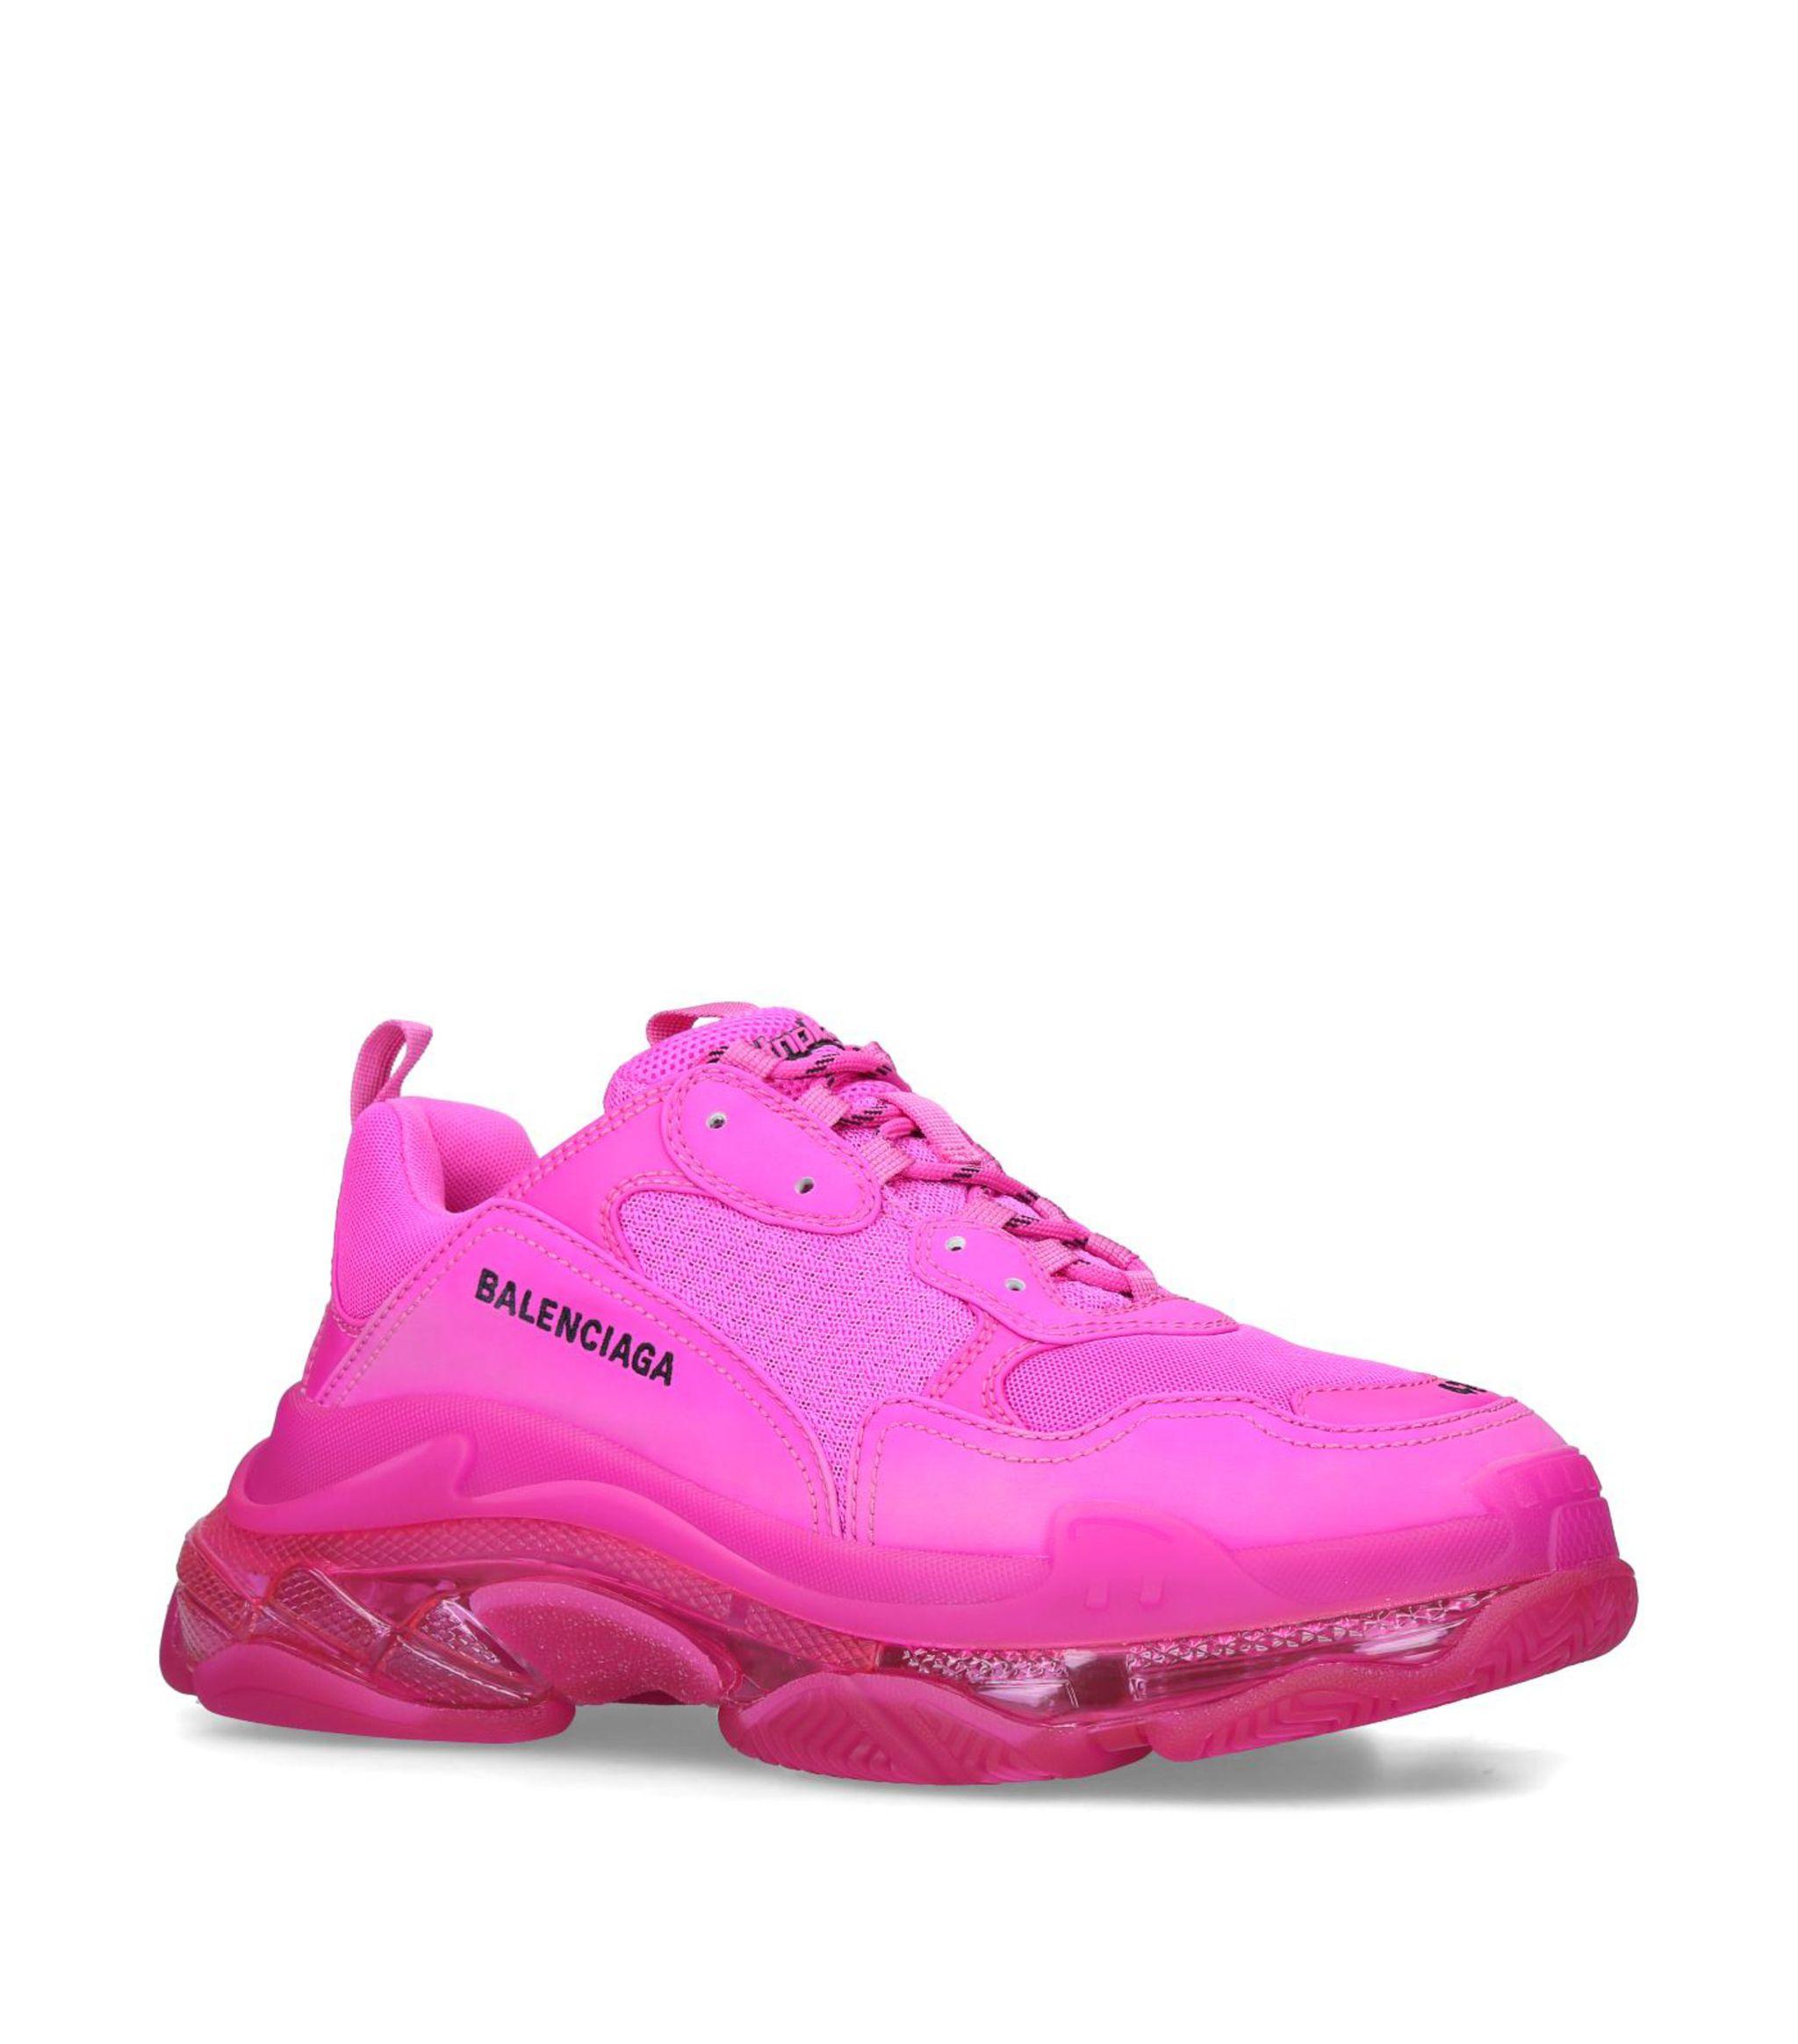 pink balenciaga sneakers outfit